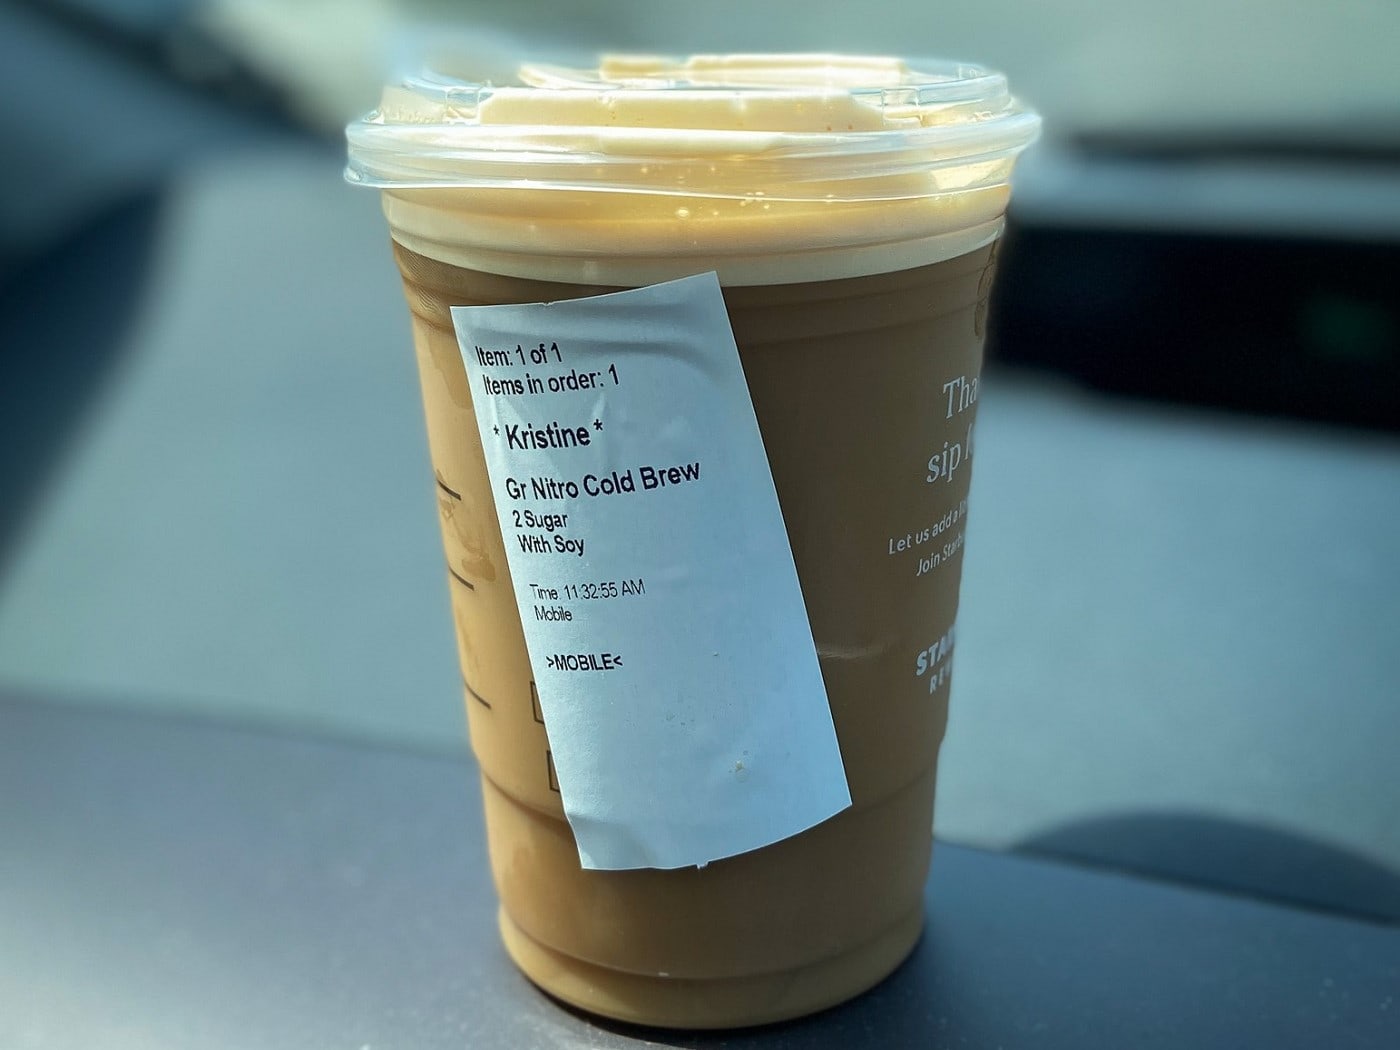 What Coffee Does Starbucks Use For Cold Brew?